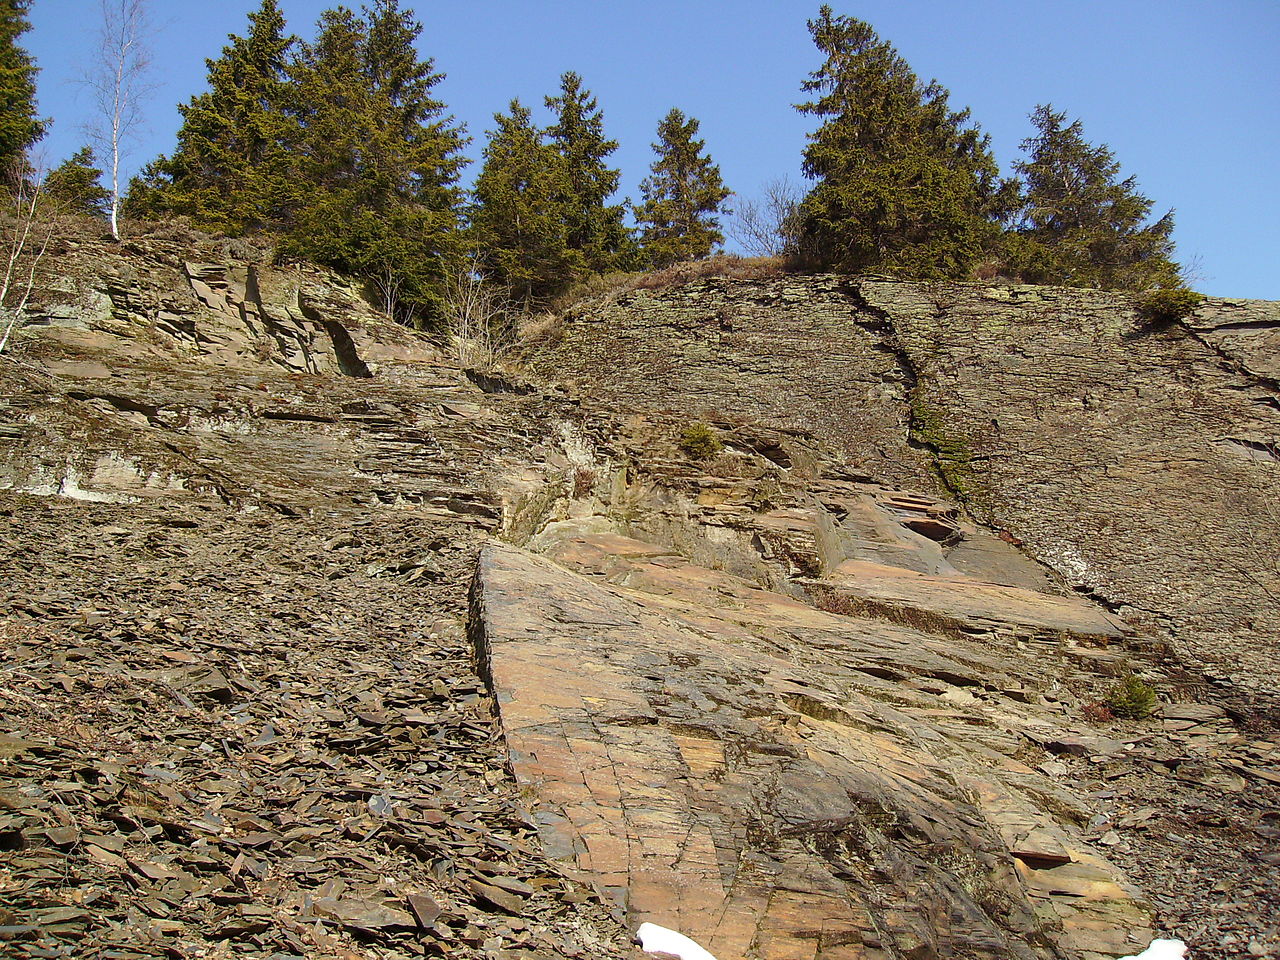 Outcrop of tan to brown thinly layered rock.